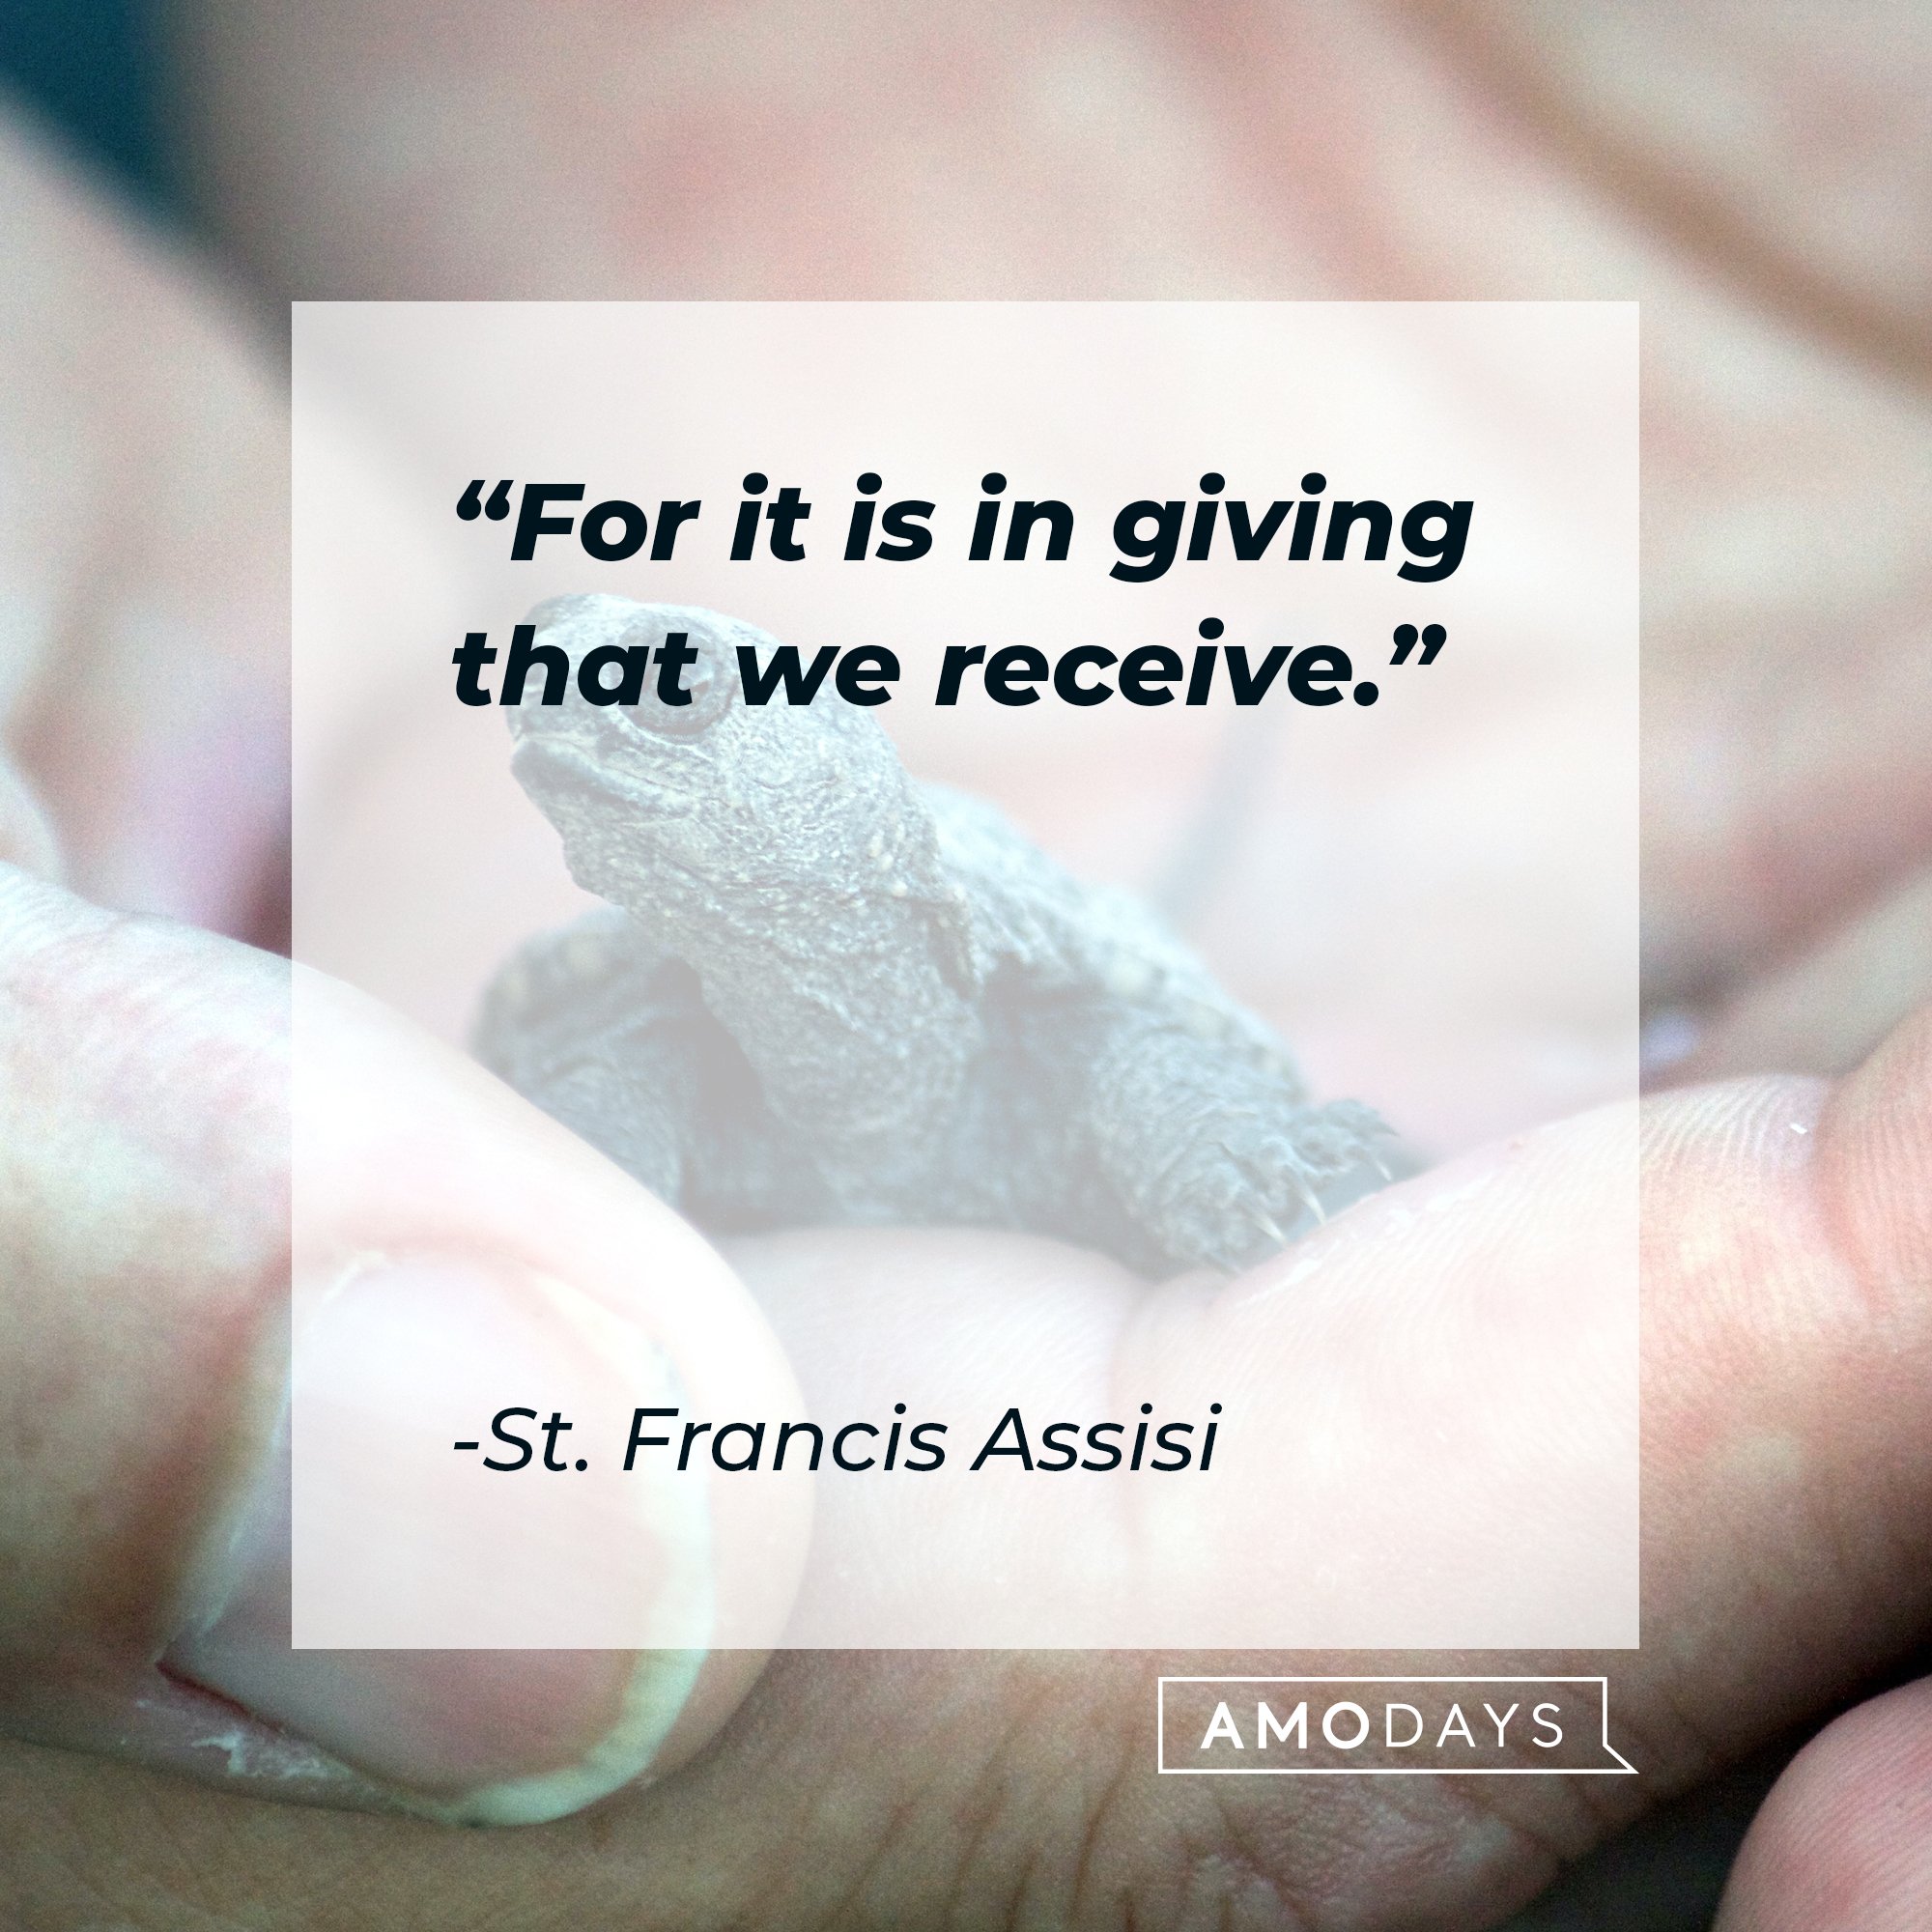 St. Francis Assisi’s quote: "For it is in giving that we receive." | Image: AmoDays 